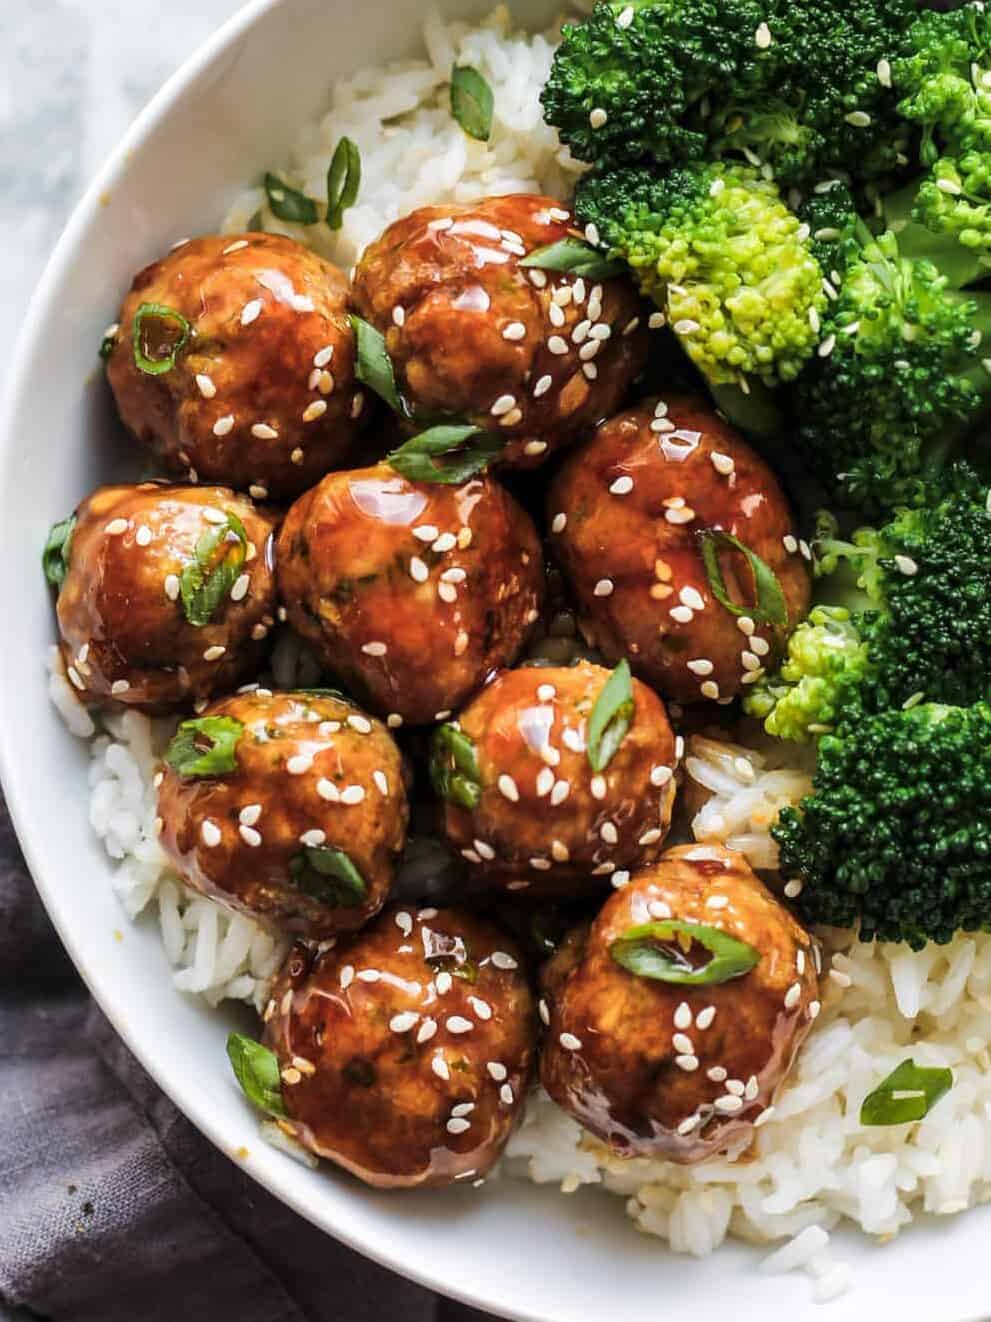 Meatballs on top of white rice and garnished